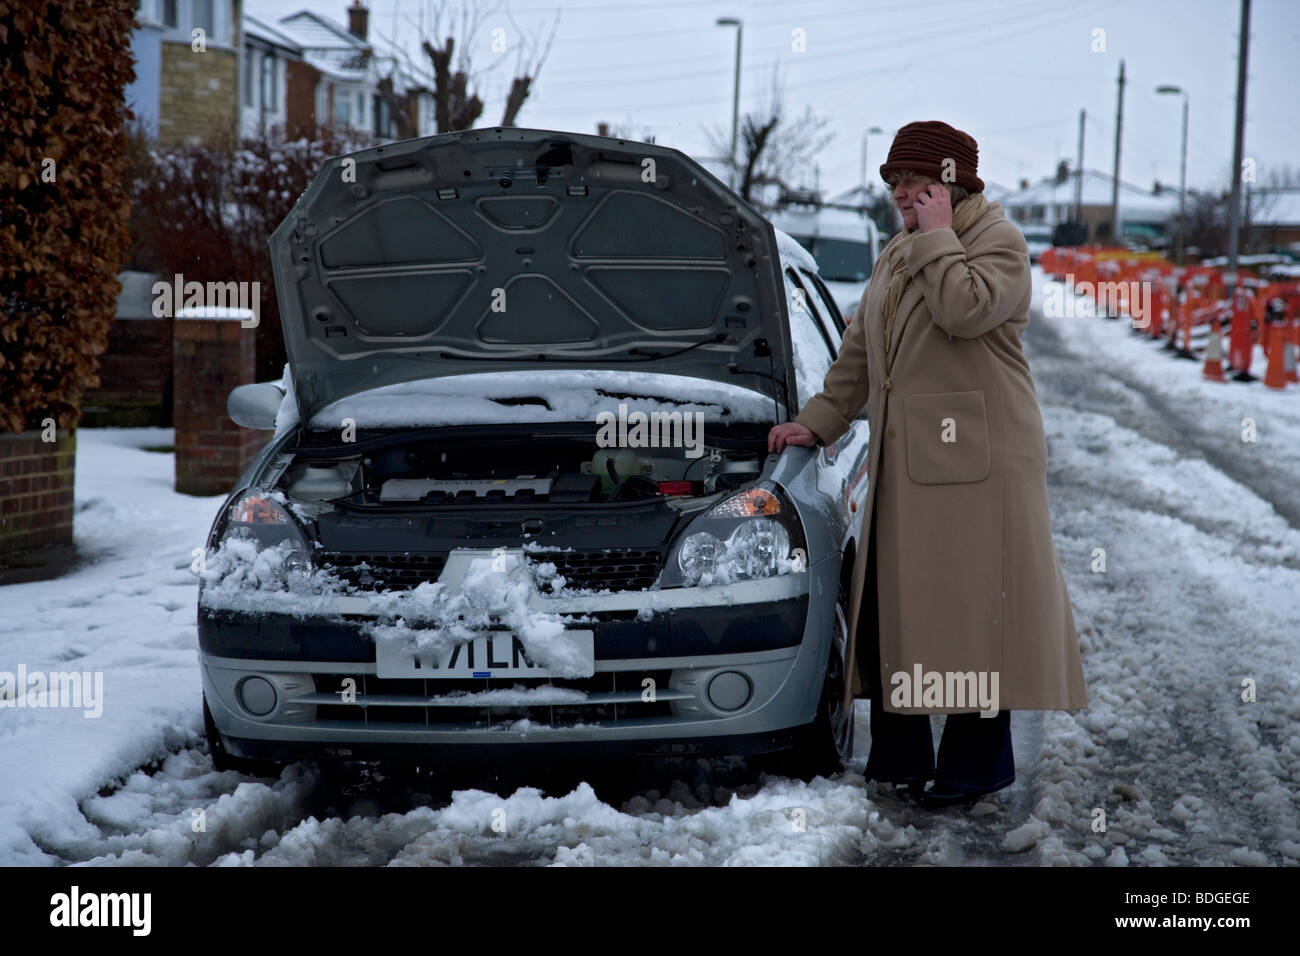 women on her own with broken down car in winter snow, bonnet up on mobile phone to breakdown recovery service Stock Photo